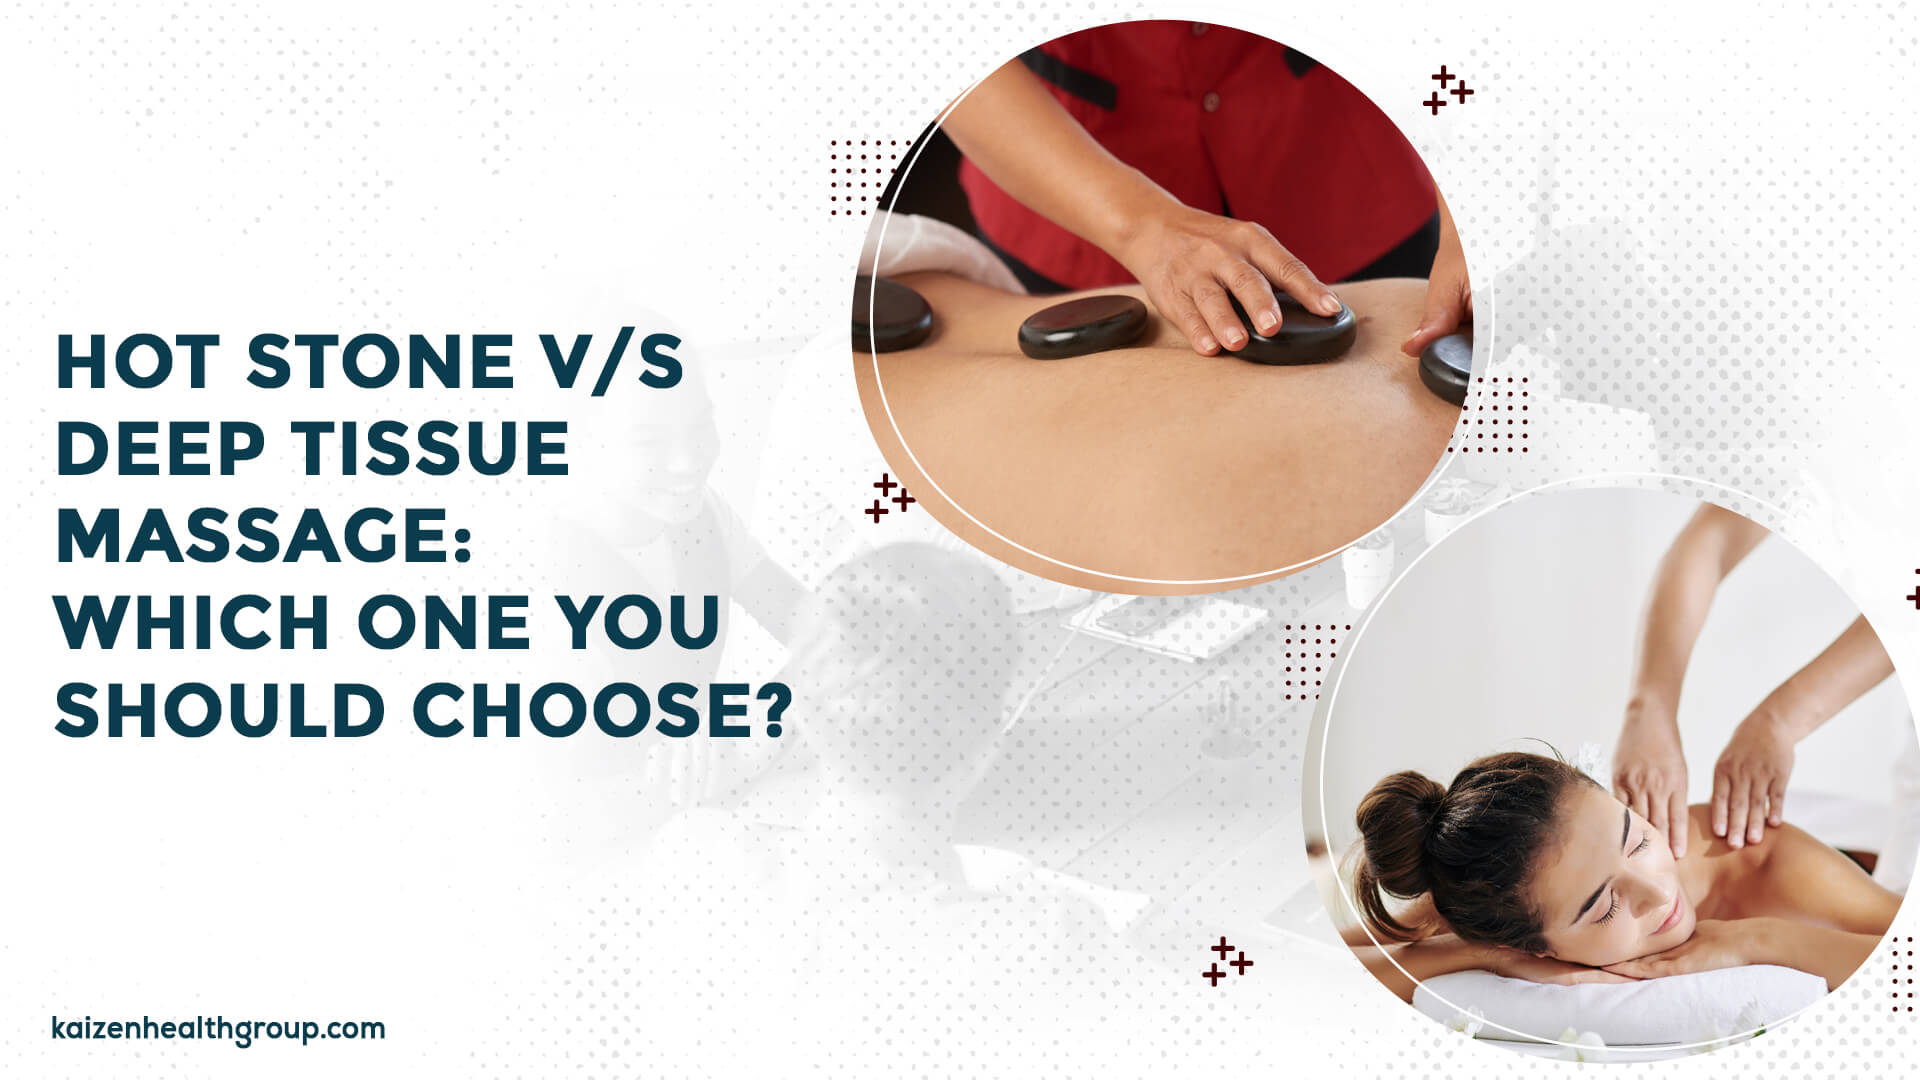 Hot stone v/s deep tissue massage Which one you should choose